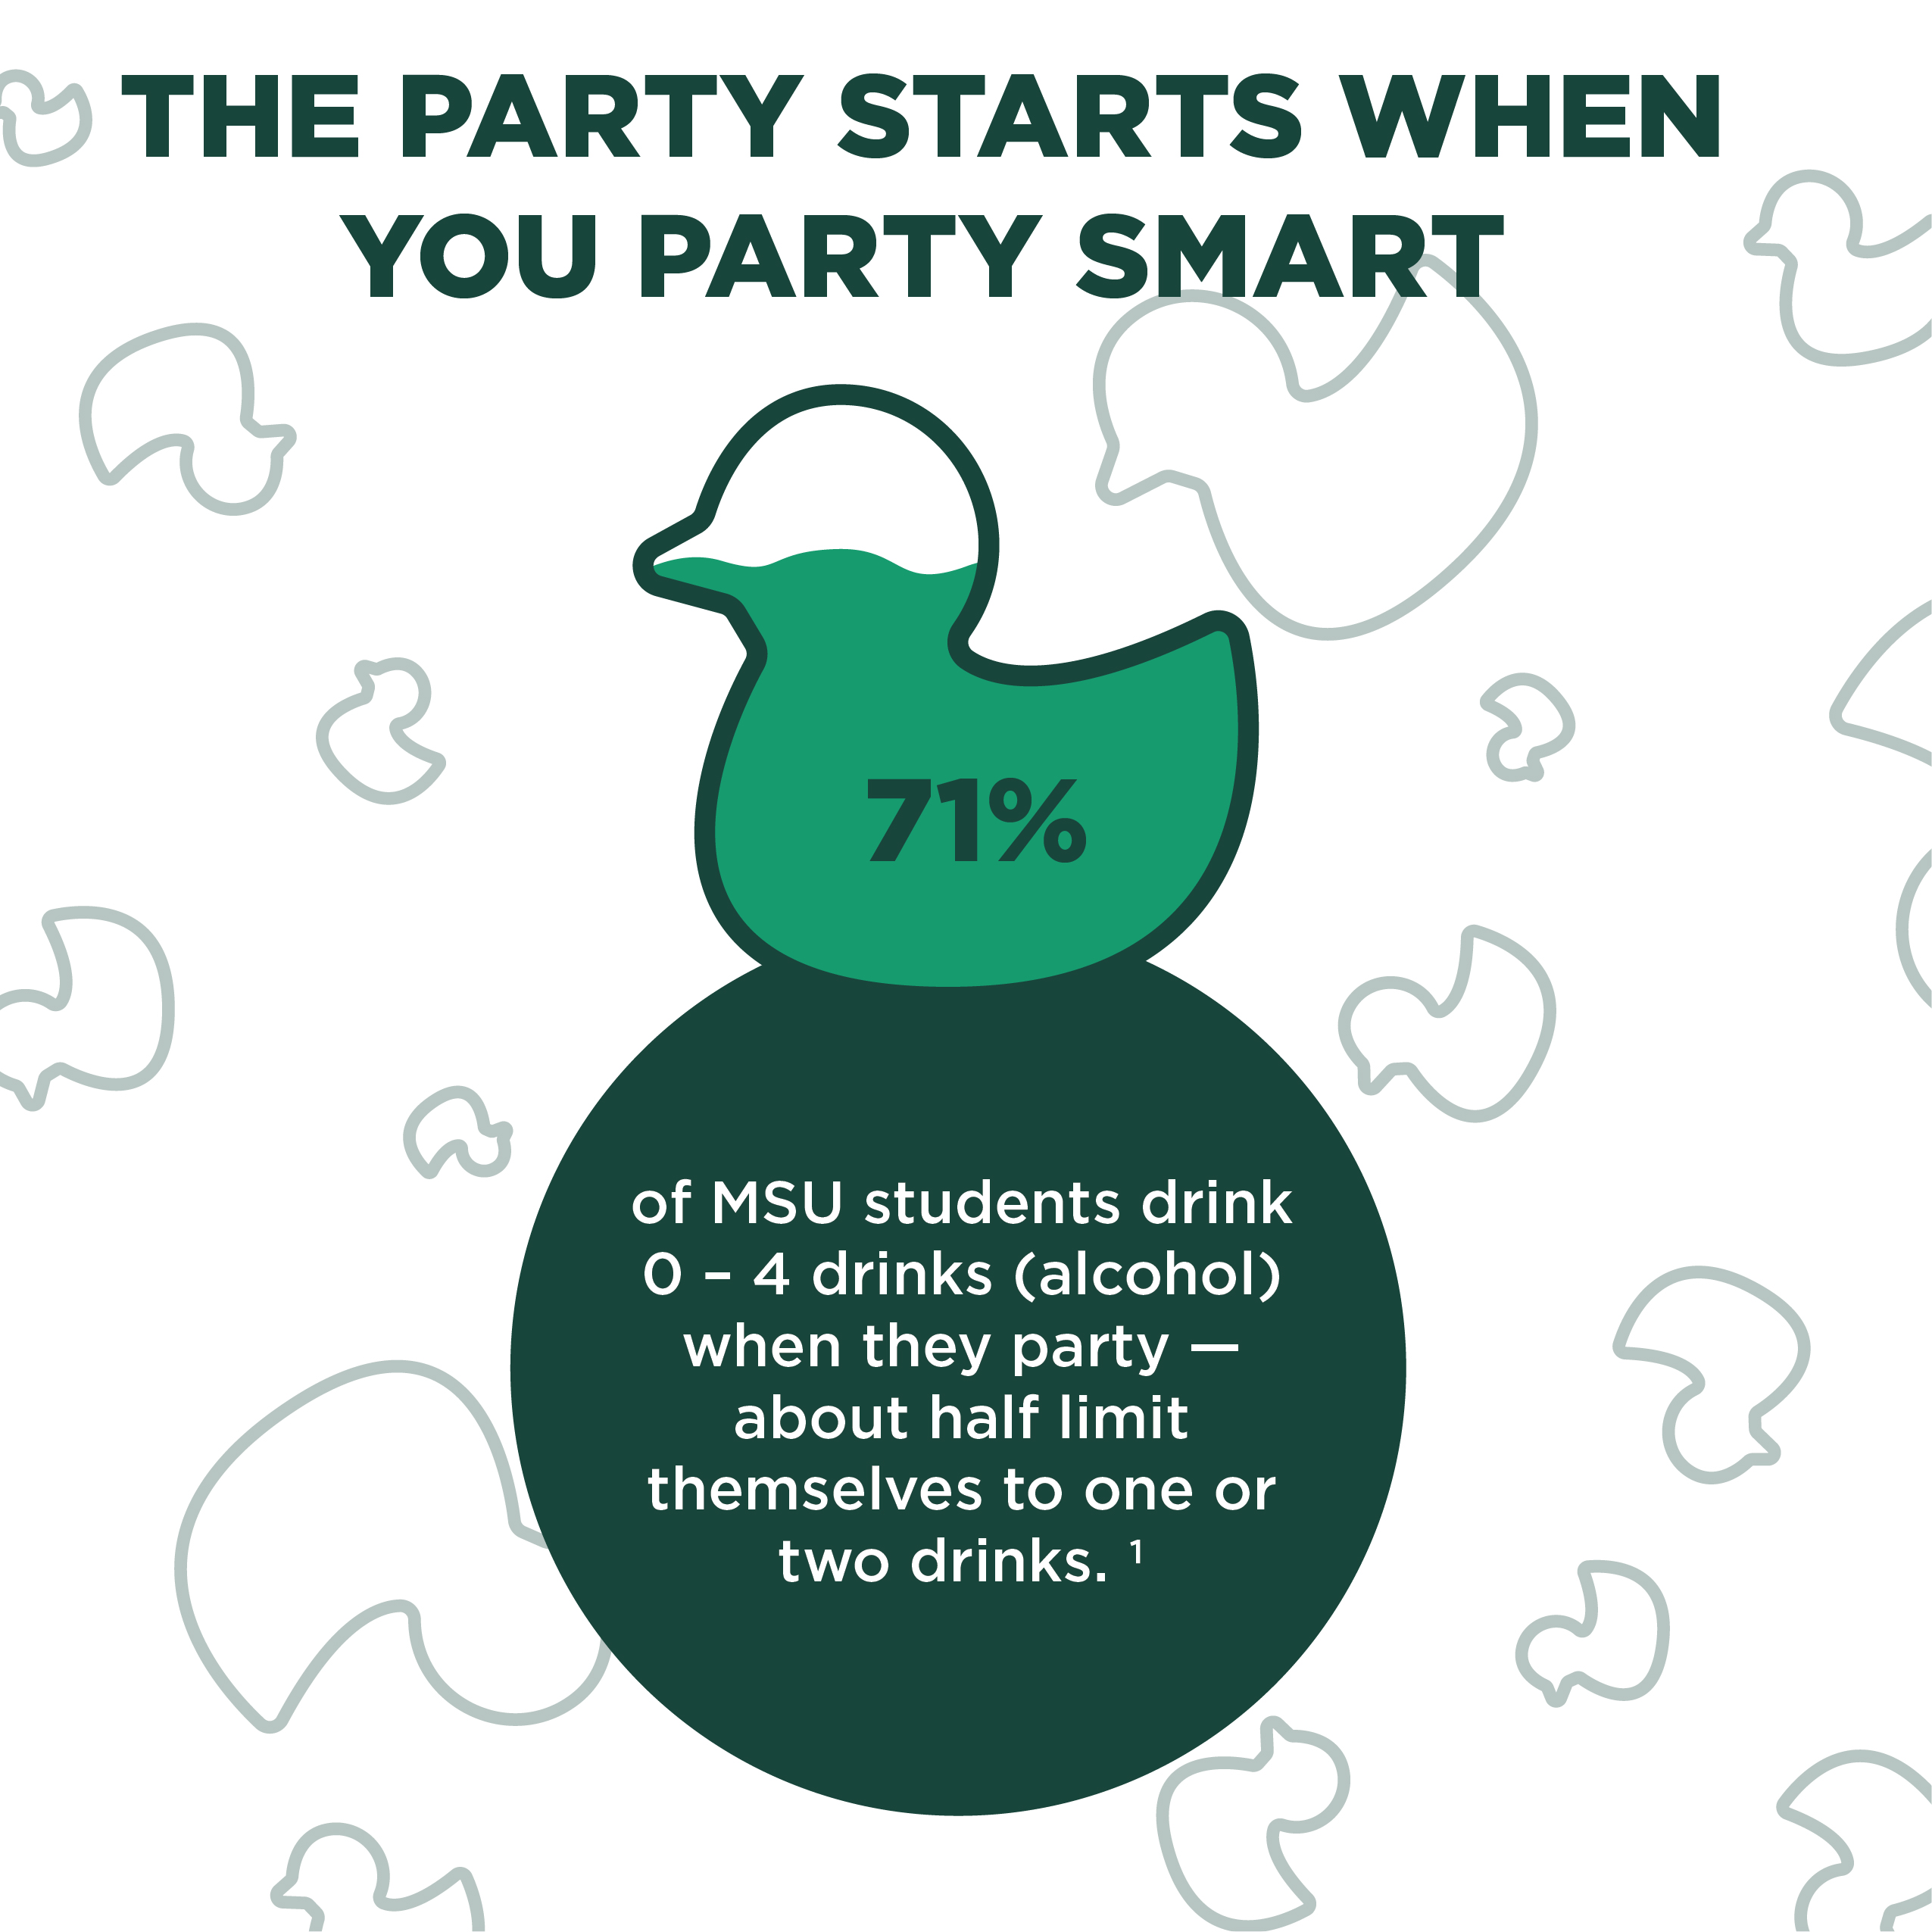 An illustrated rubber duck sits atop a circle. Most of the duck is colored in like a thermometer. Text reads, "71% of MSU students drink 0-4 alcoholic drinks when they party. About half limit themselves to one or two drinks."